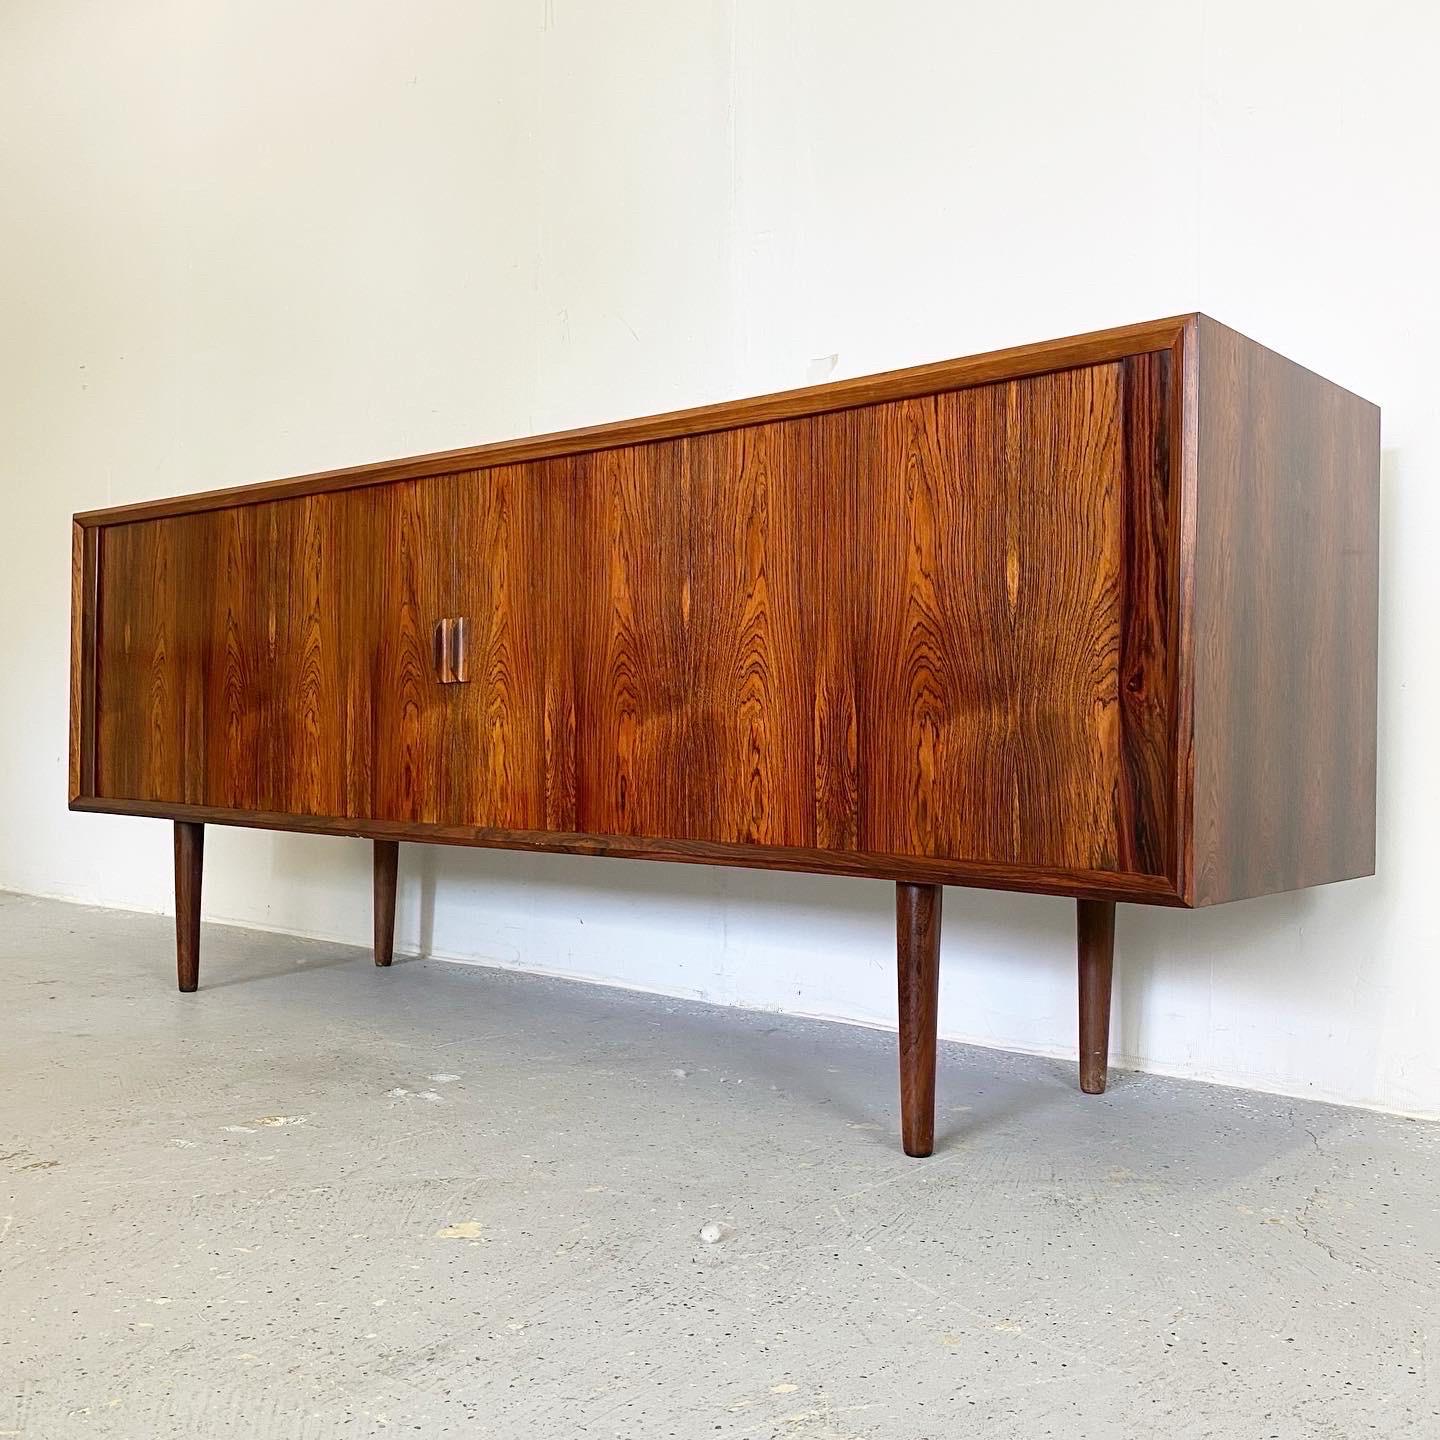 With striking rosewood grain throughout and plenty of concealed storage this credenza is a show stopper. The tambour doors work great and slide smoothly. This piece has not been restored but is in excellent vintage condition. A classic Danish modern